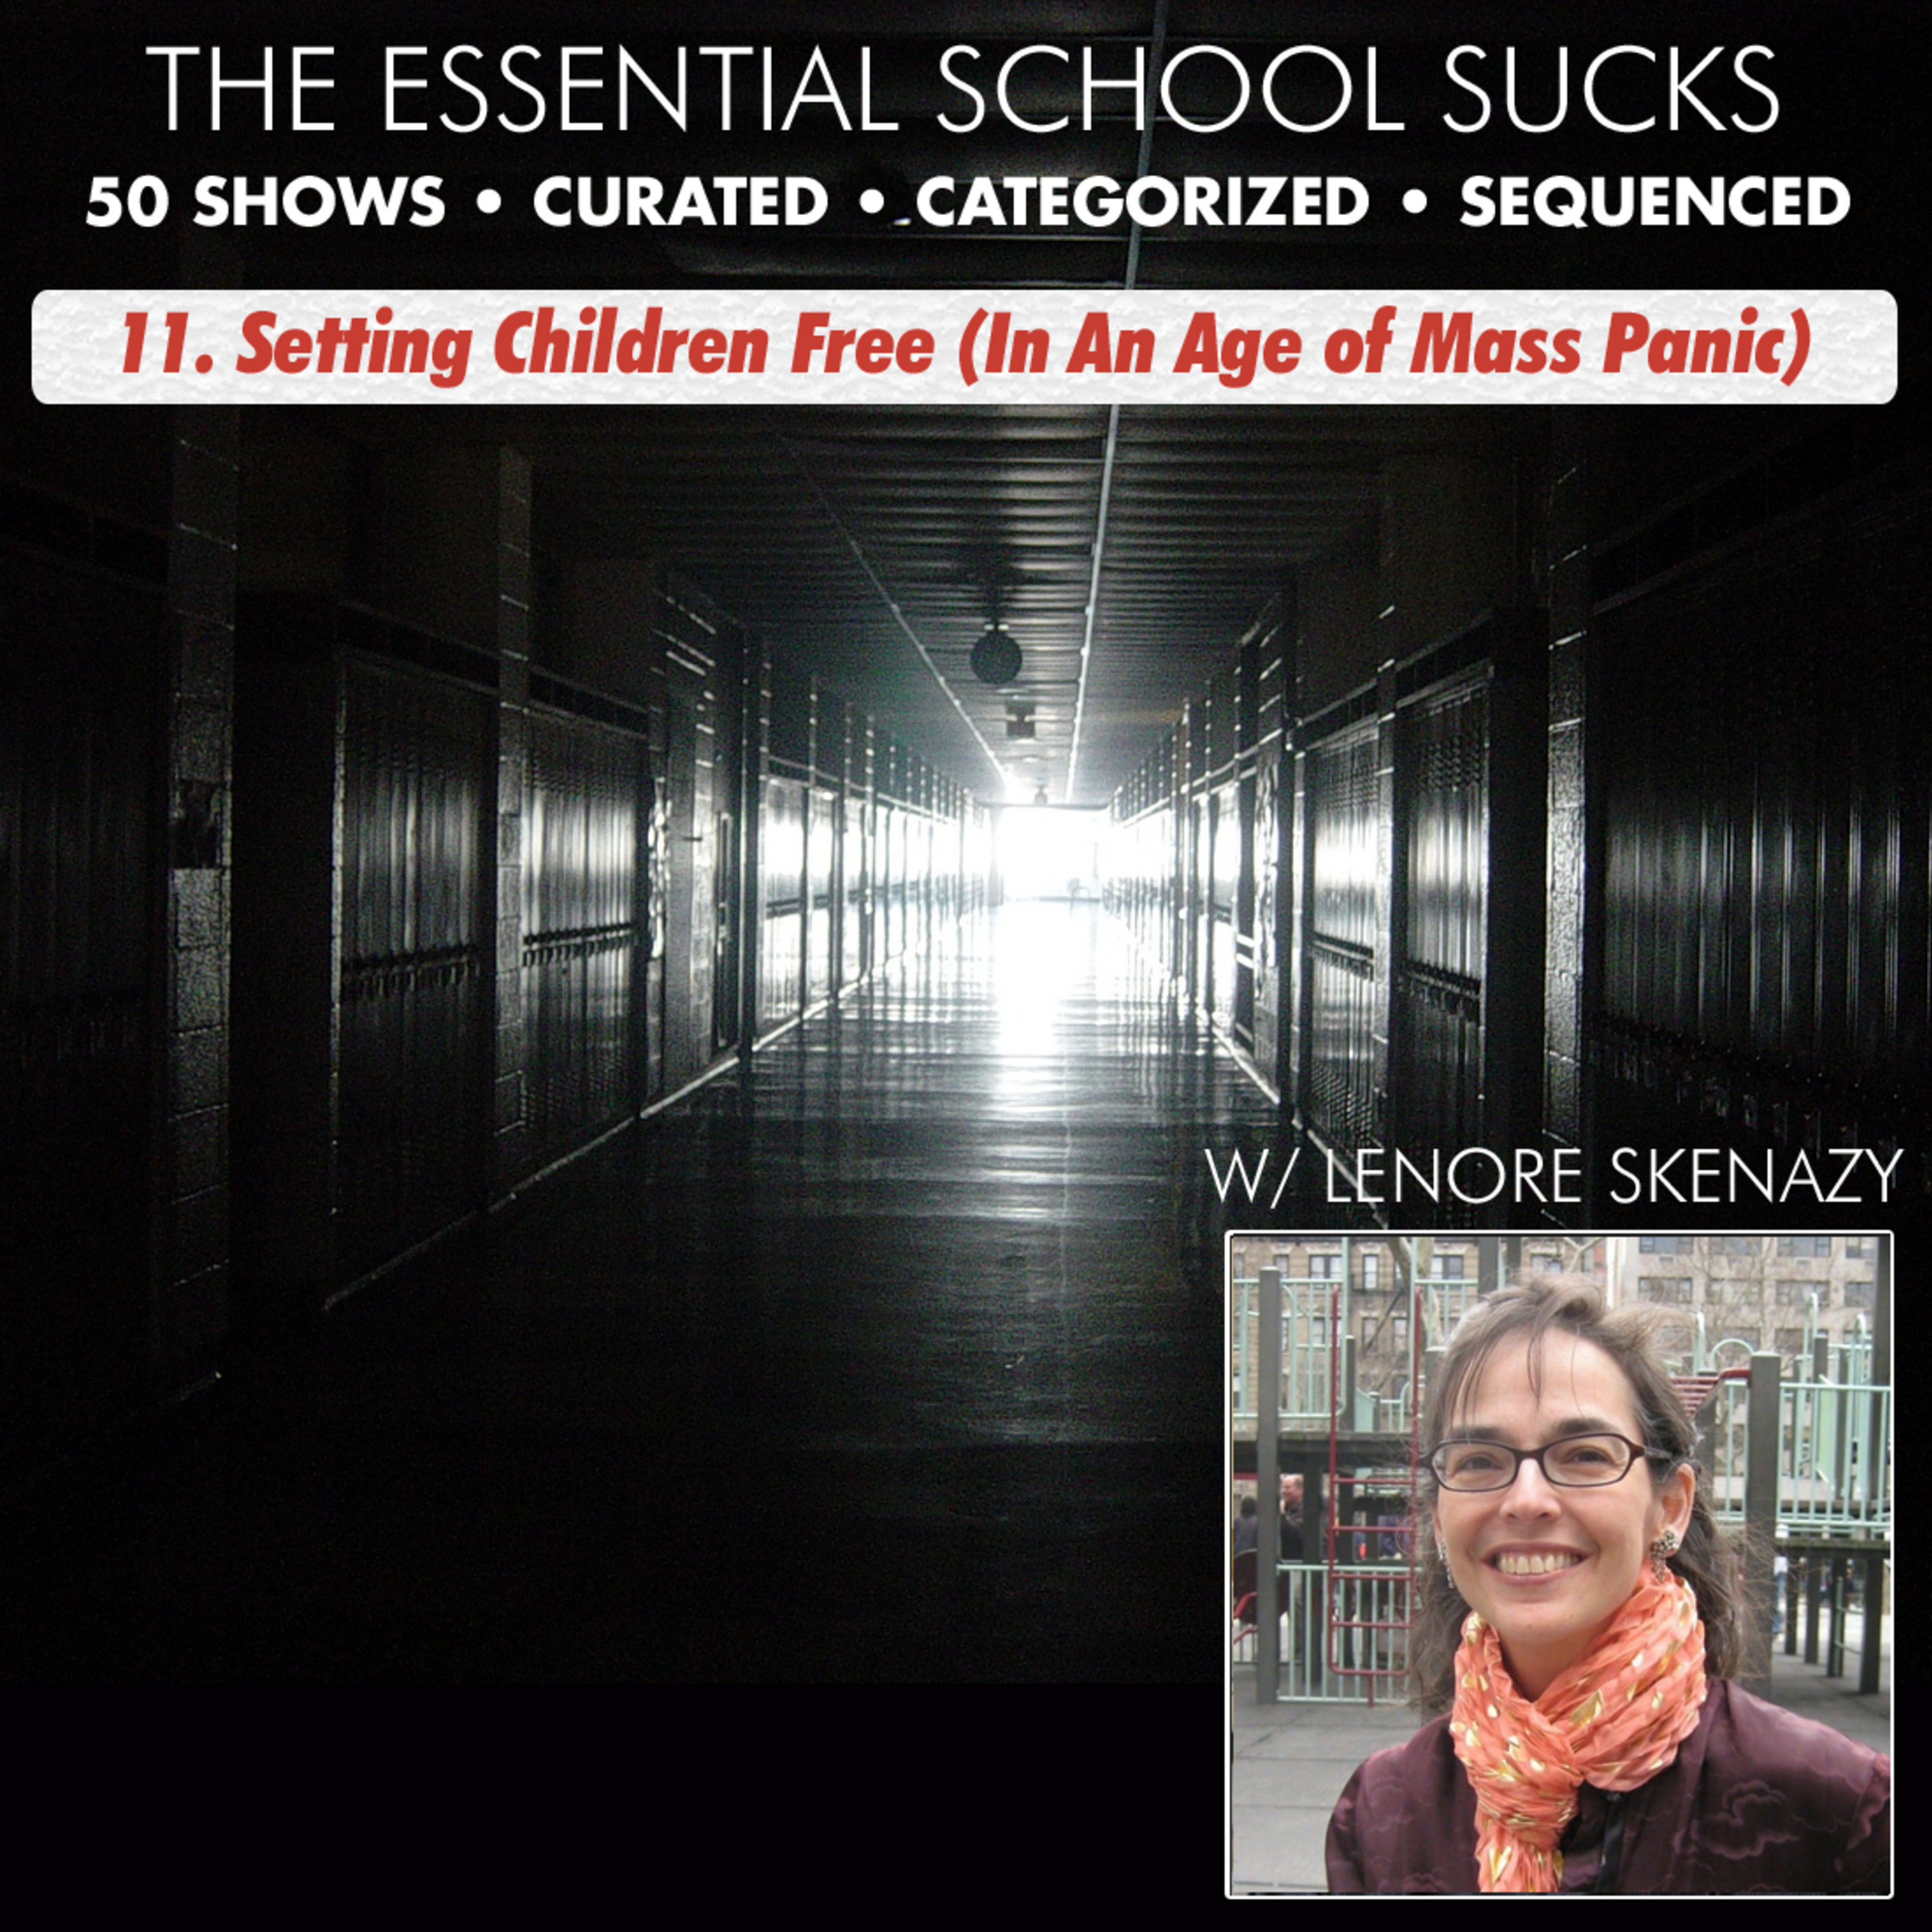 11. Setting Children Free (In An Age of Mass Panic)